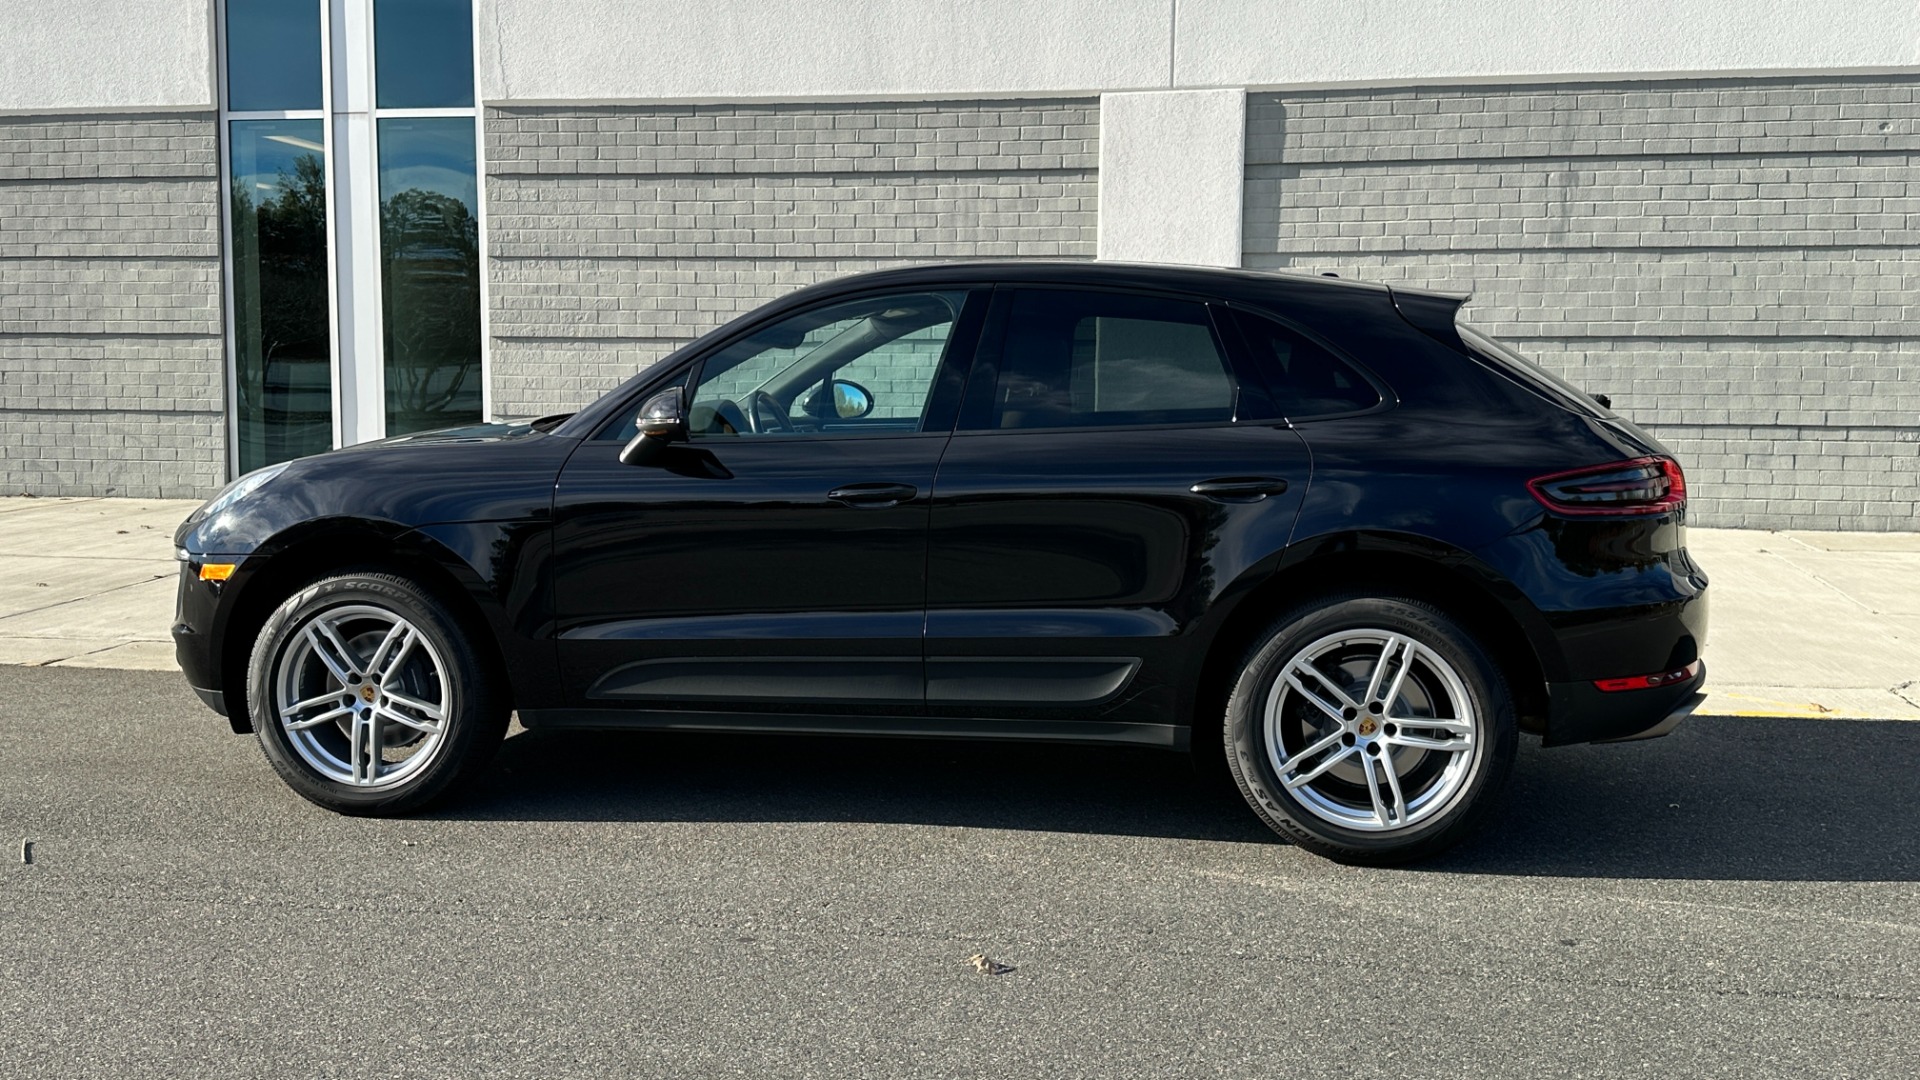 Used 2018 Porsche Macan SPORT EDITION / PREMIUM PLUS PACKAGE / BOSE SOUND / NAV / LANGE CHANGE ASSI for sale $39,900 at Formula Imports in Charlotte NC 28227 3